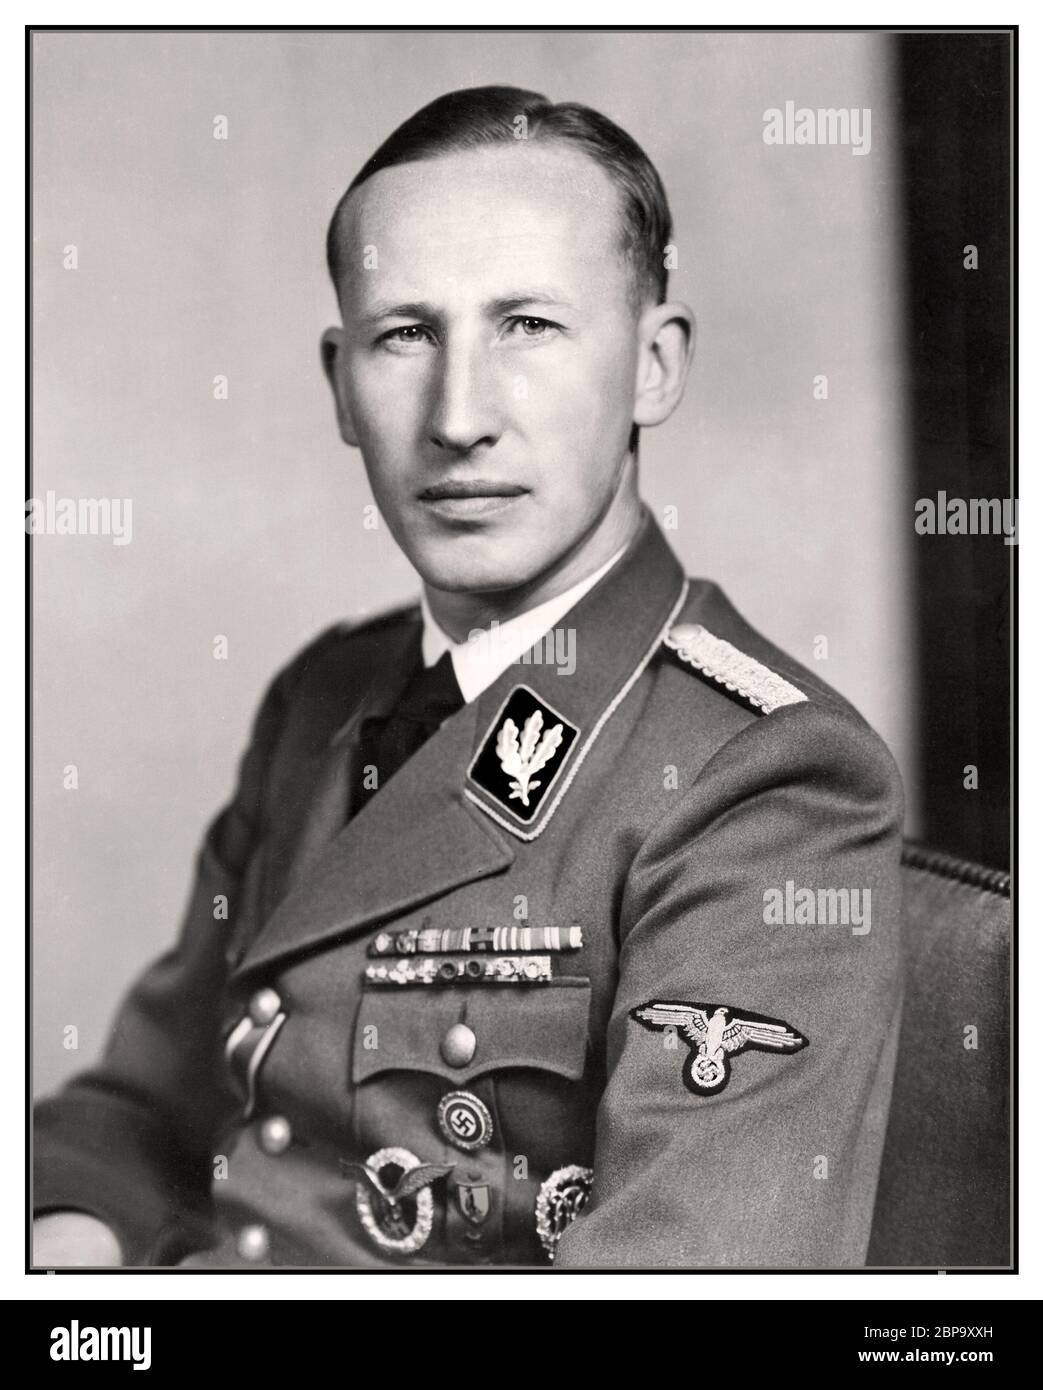 Reinhard Heydrich Nazi archive portrait 1939 German military & political leader high-ranking German Nazi official assassinated in Prague by brave resistance fighters in 1942 Reinhard Tristan Eugen Heydrich was a high-ranking German SS and police official during the Nazi era, a fervent supporter of Adolf Hitler and a main architect of the Holocaust. He was chief of the Reich Main Security Office. He was also Stellvertretender Reichsprotektor of Bohemia and Moravia. A brutal war criminal by any account, whose timely assassination was much celebrated across anti-Nazi Europe. Stock Photo